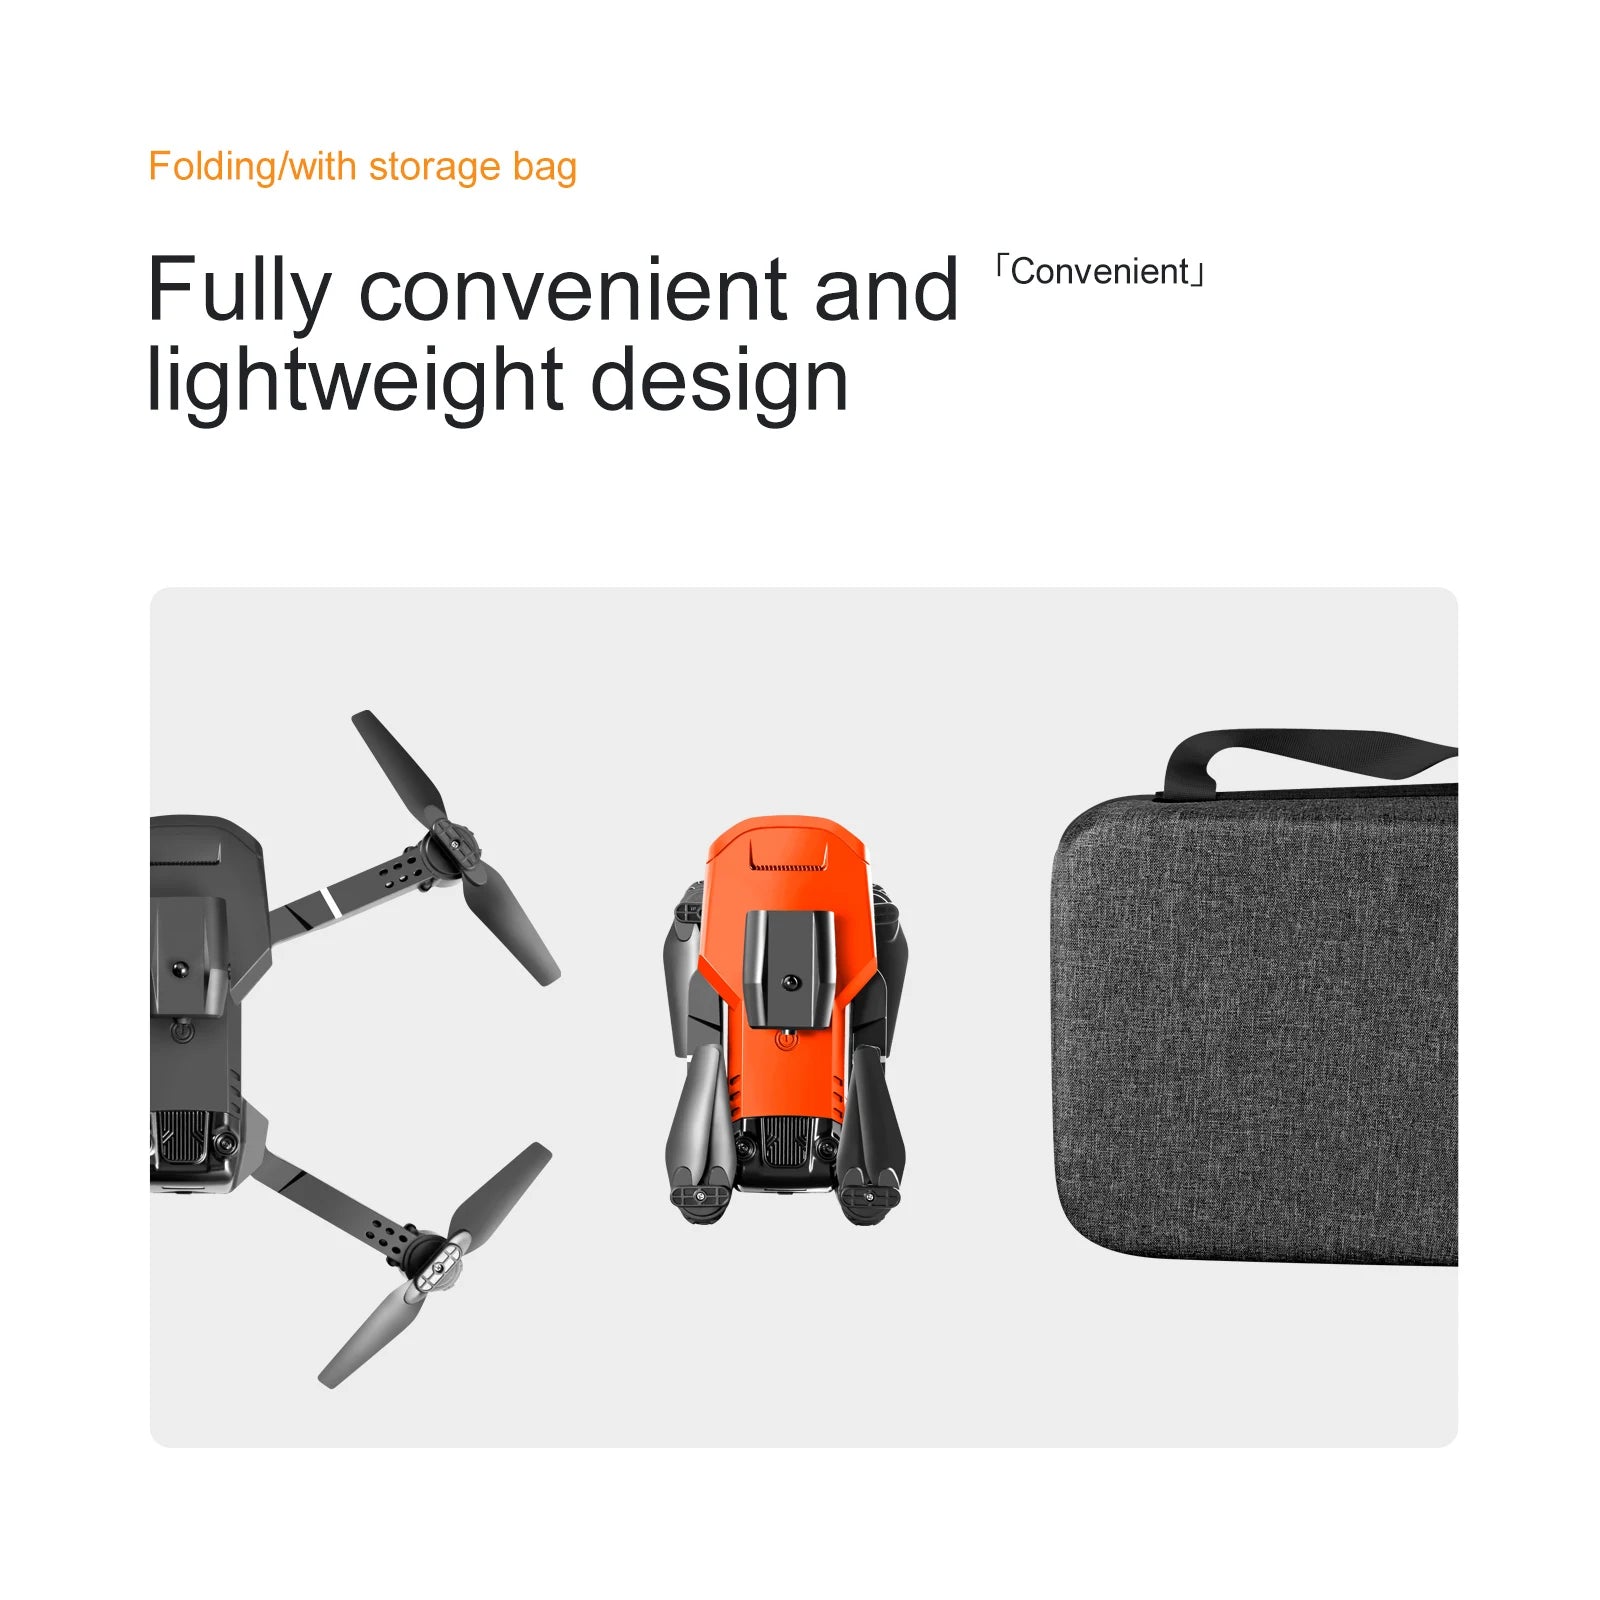 lightweight design bag with storage fully convenient and tconvenient 